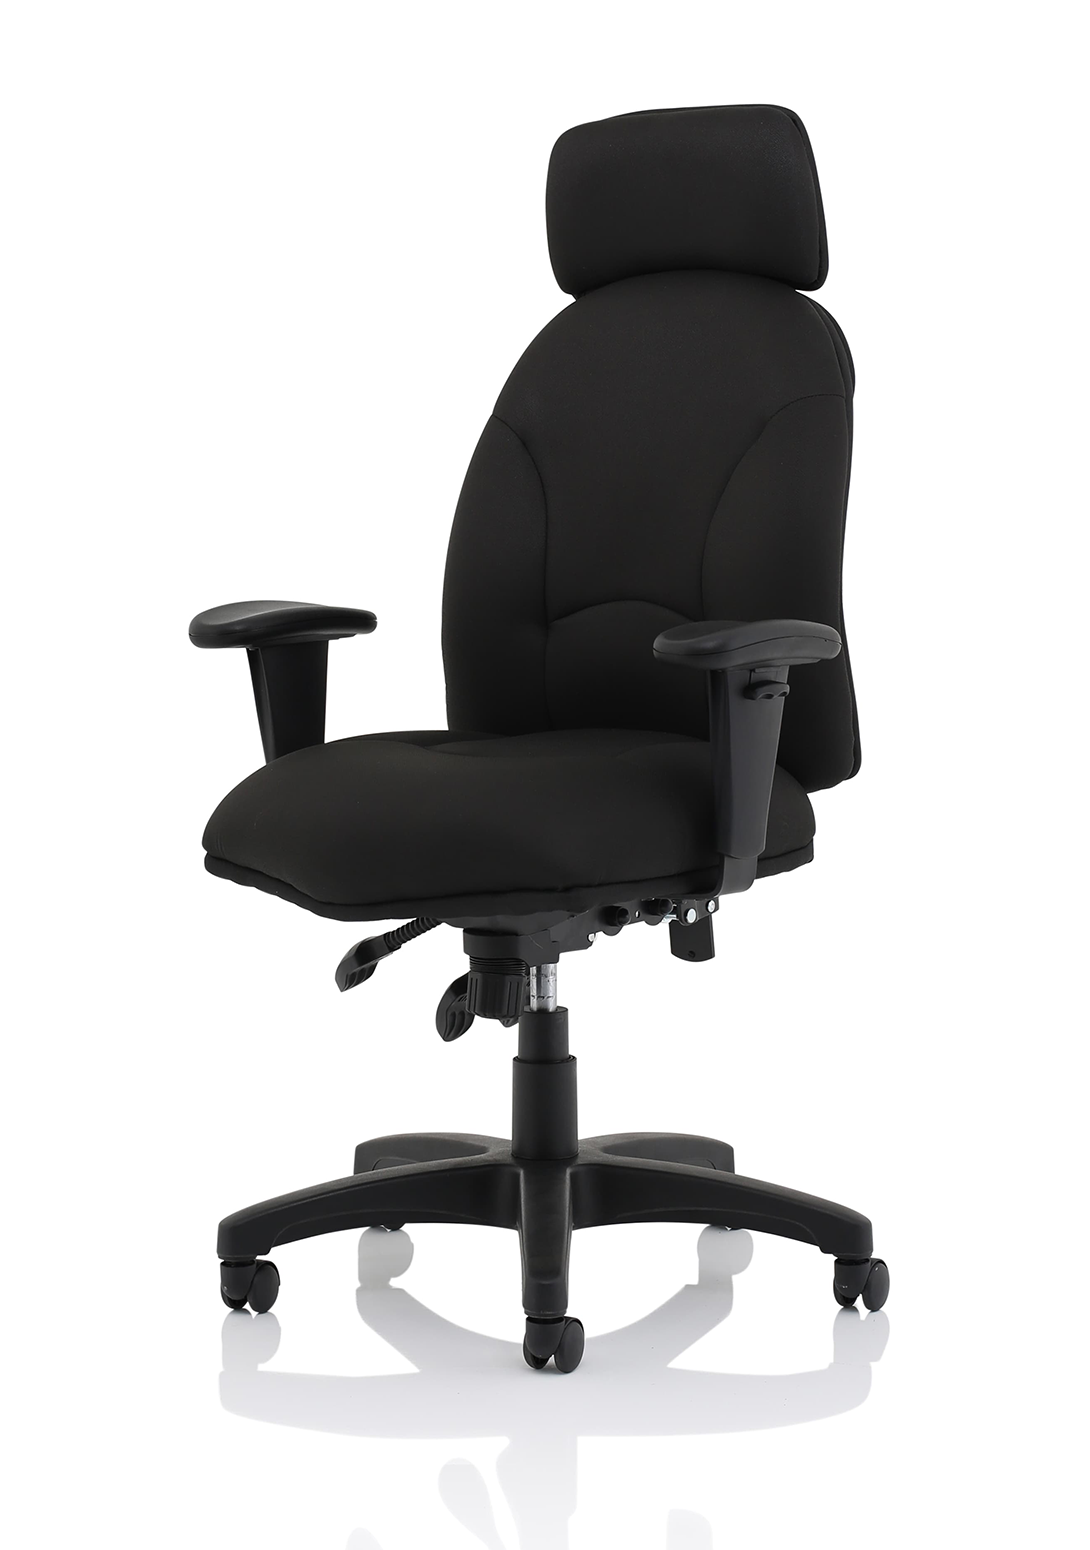 Jet Exec Home Office Chair | Operator Chair | Home Office Furniture | Task Chair | Task Operator Chair | Ergonomic Office Chair | Home Office Chair